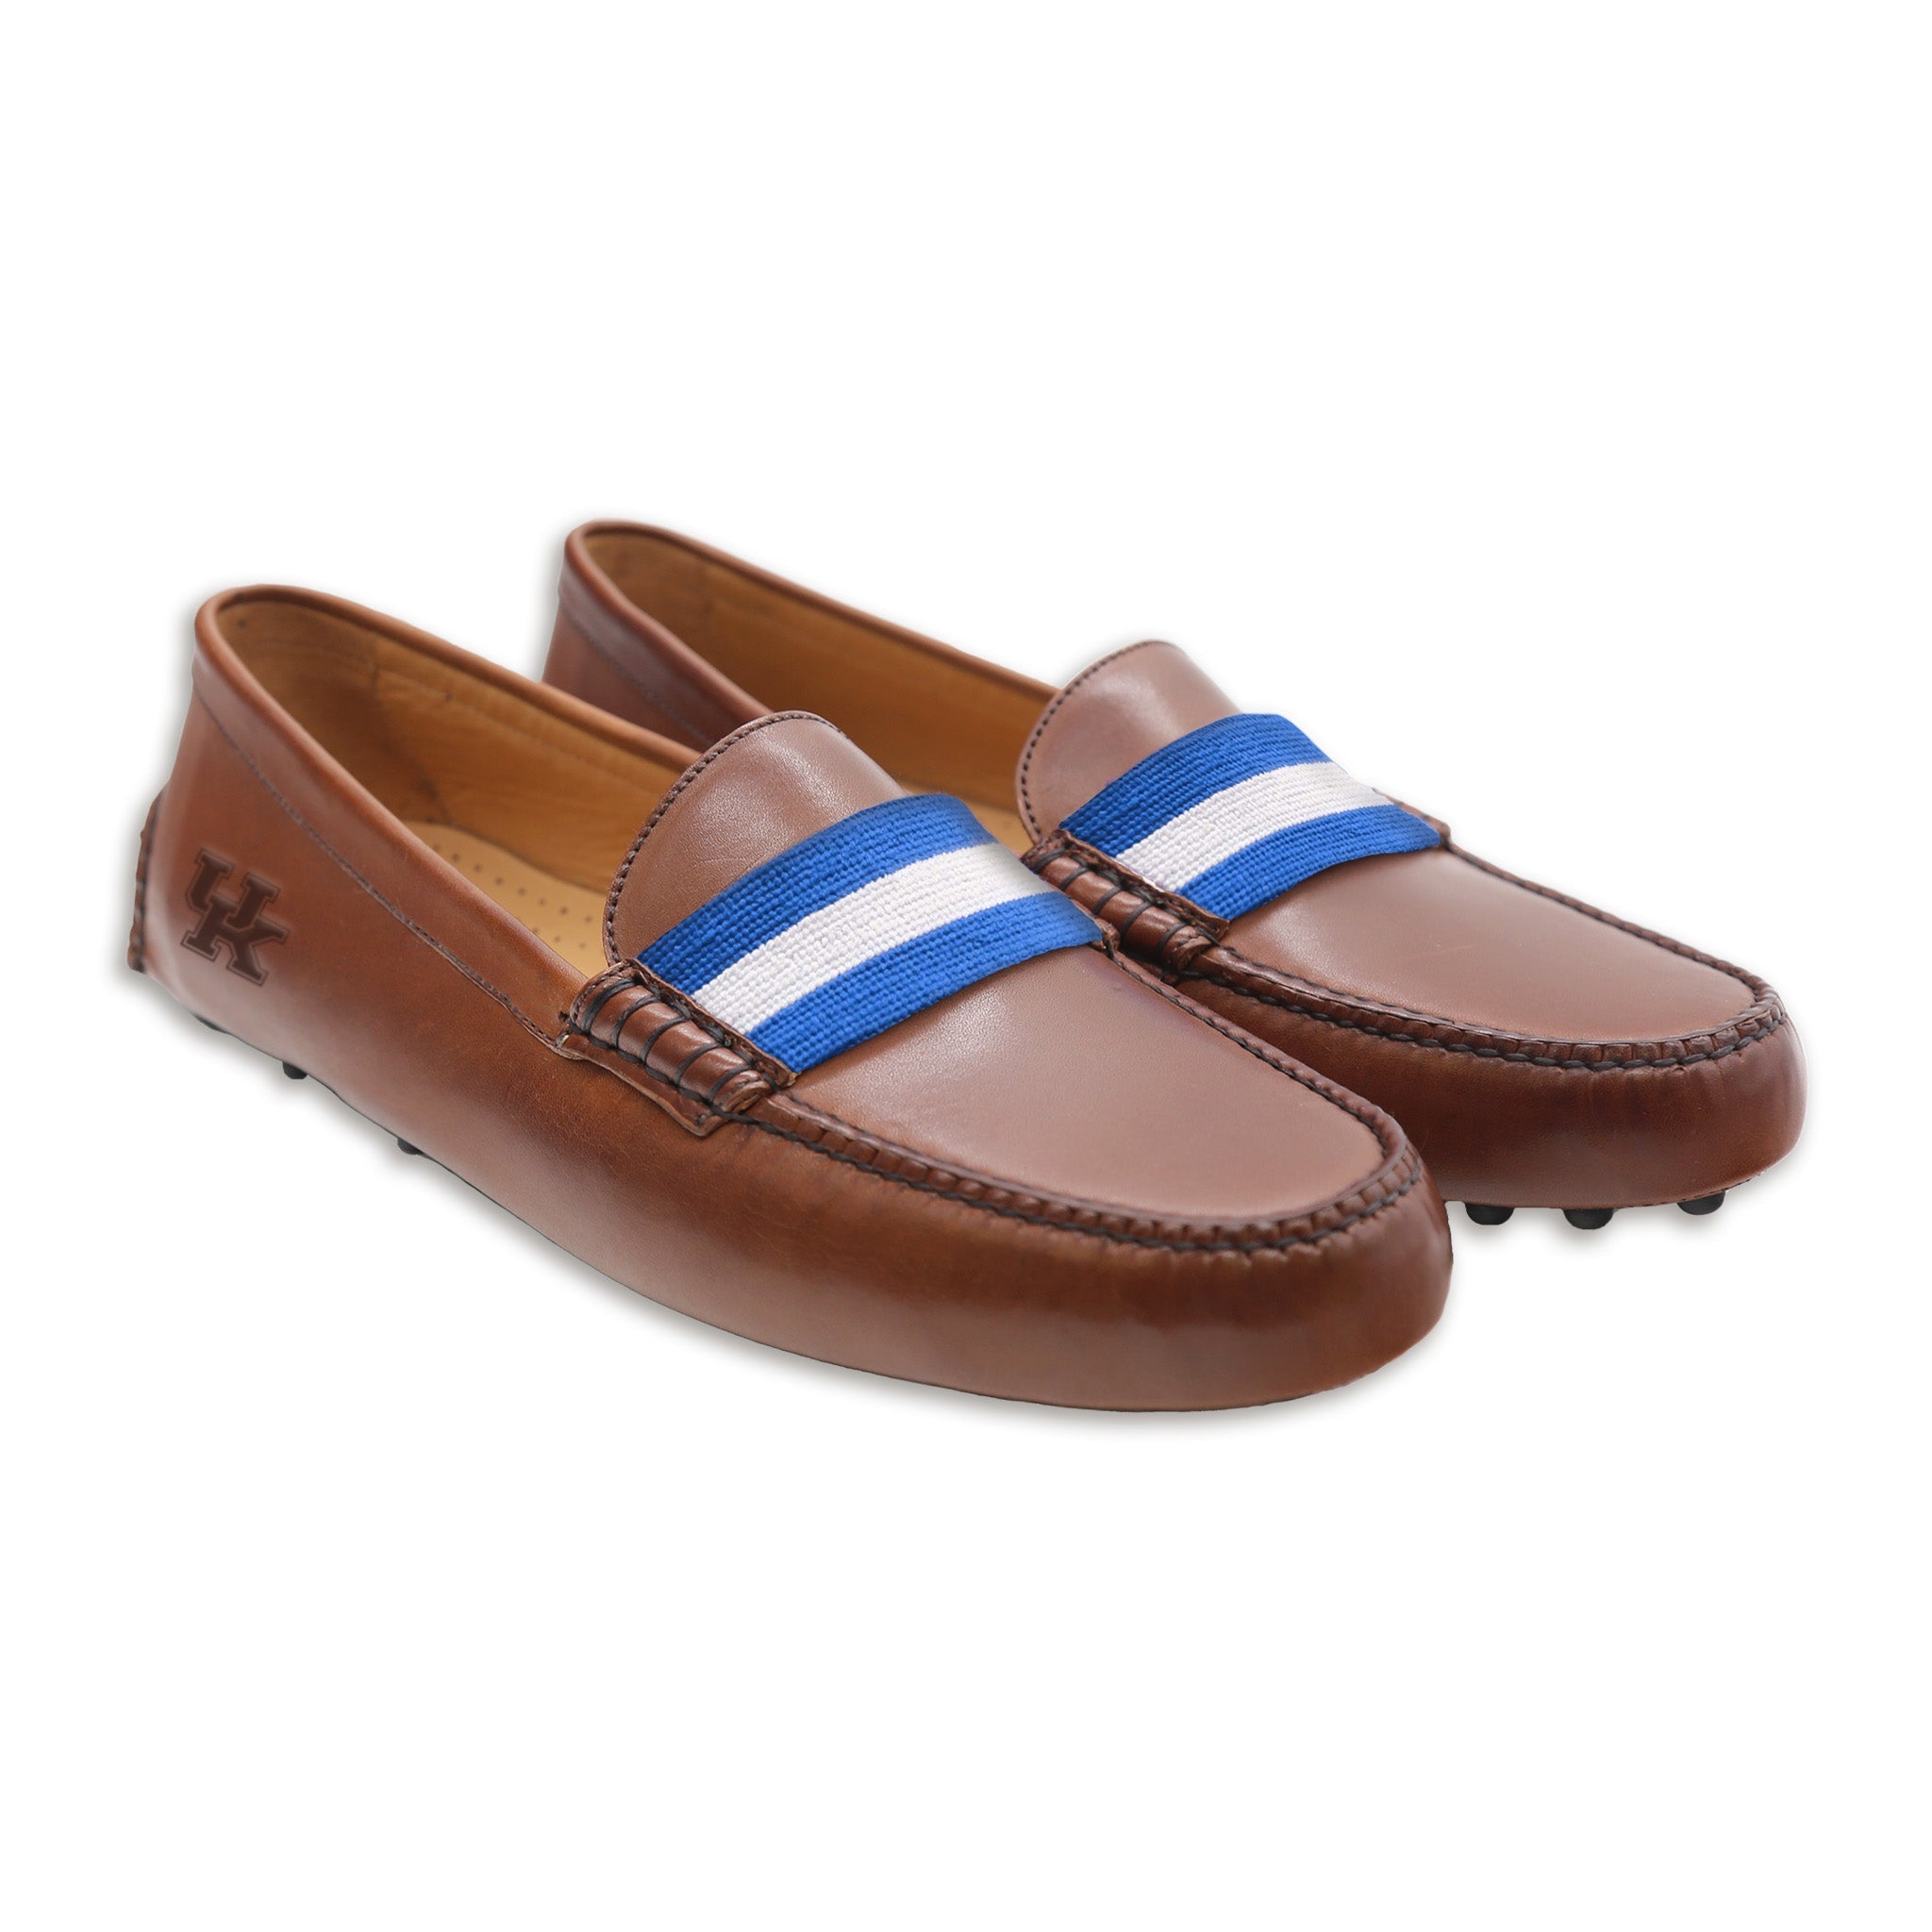 – & Branson Driving (Blue-White) Shoes Smathers Surcingle (Chestnut Kentucky Leather-Logo)